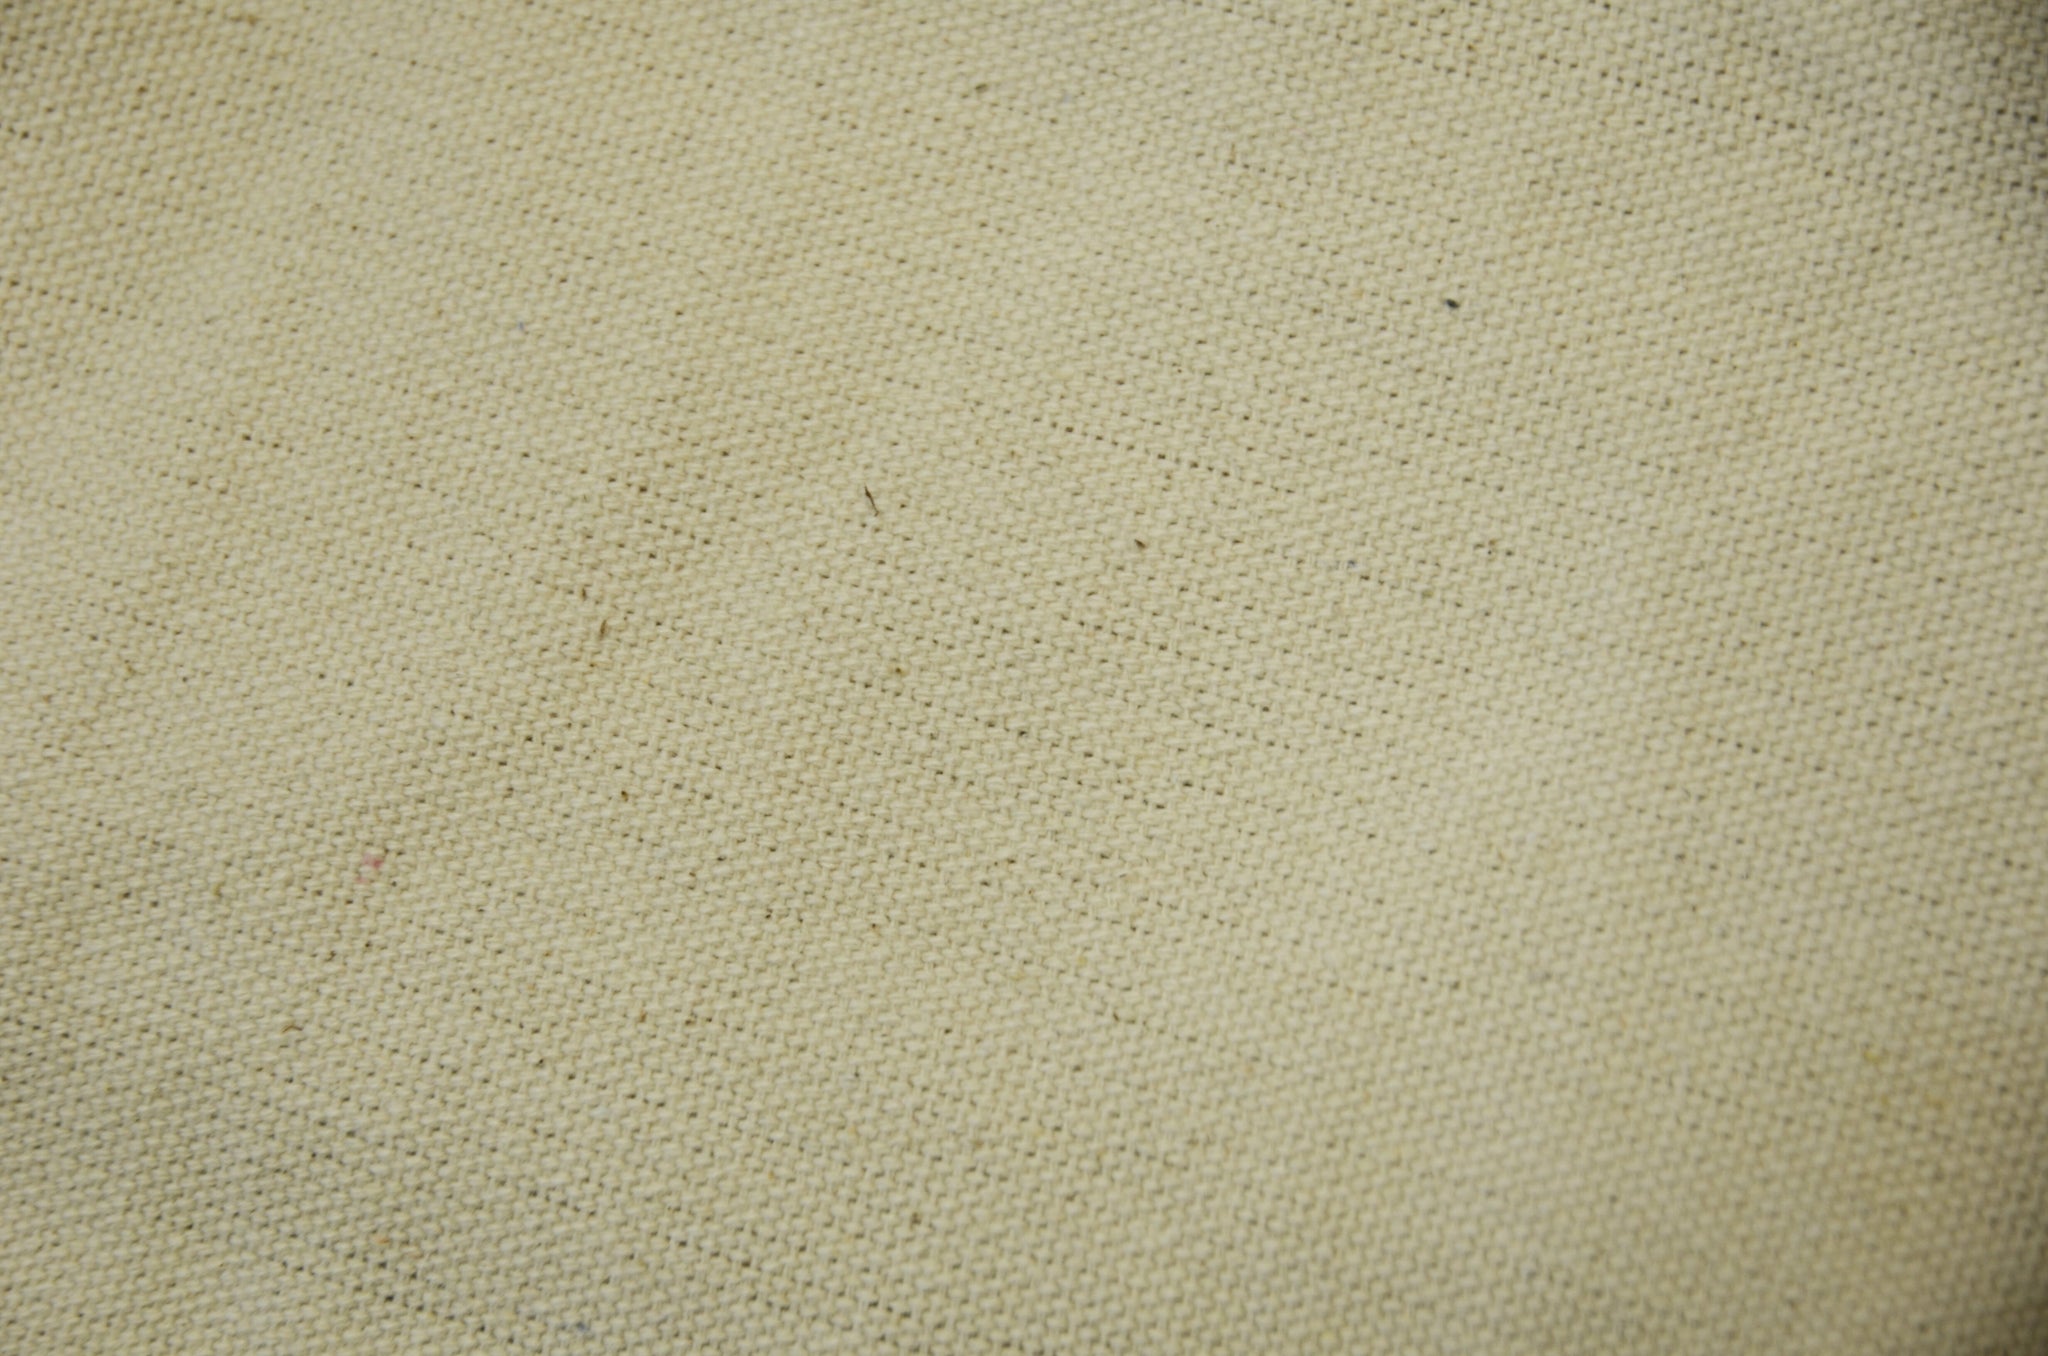 Muslin Cotton Natural (Loomstate) - Cotton Fabric